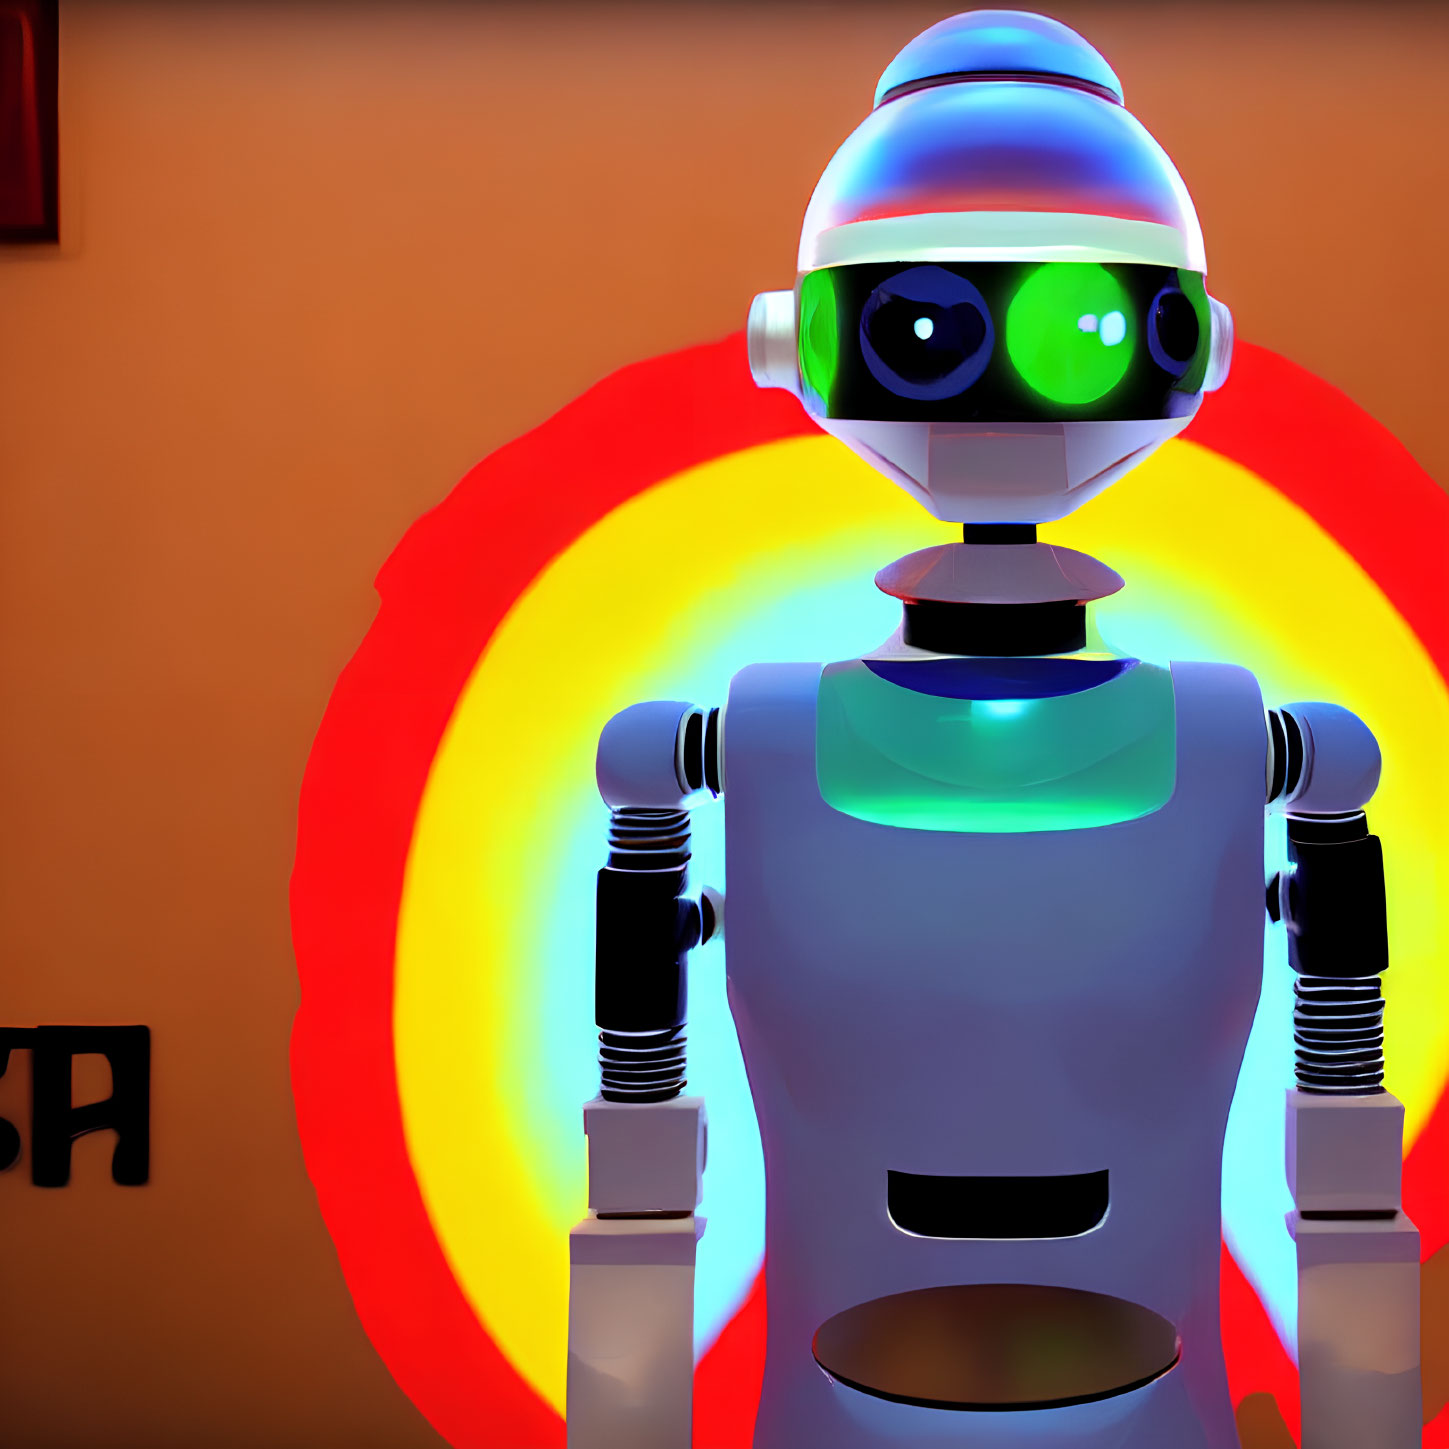 Round-headed cartoon robot with green eyes and visor on vibrant orange and yellow backdrop